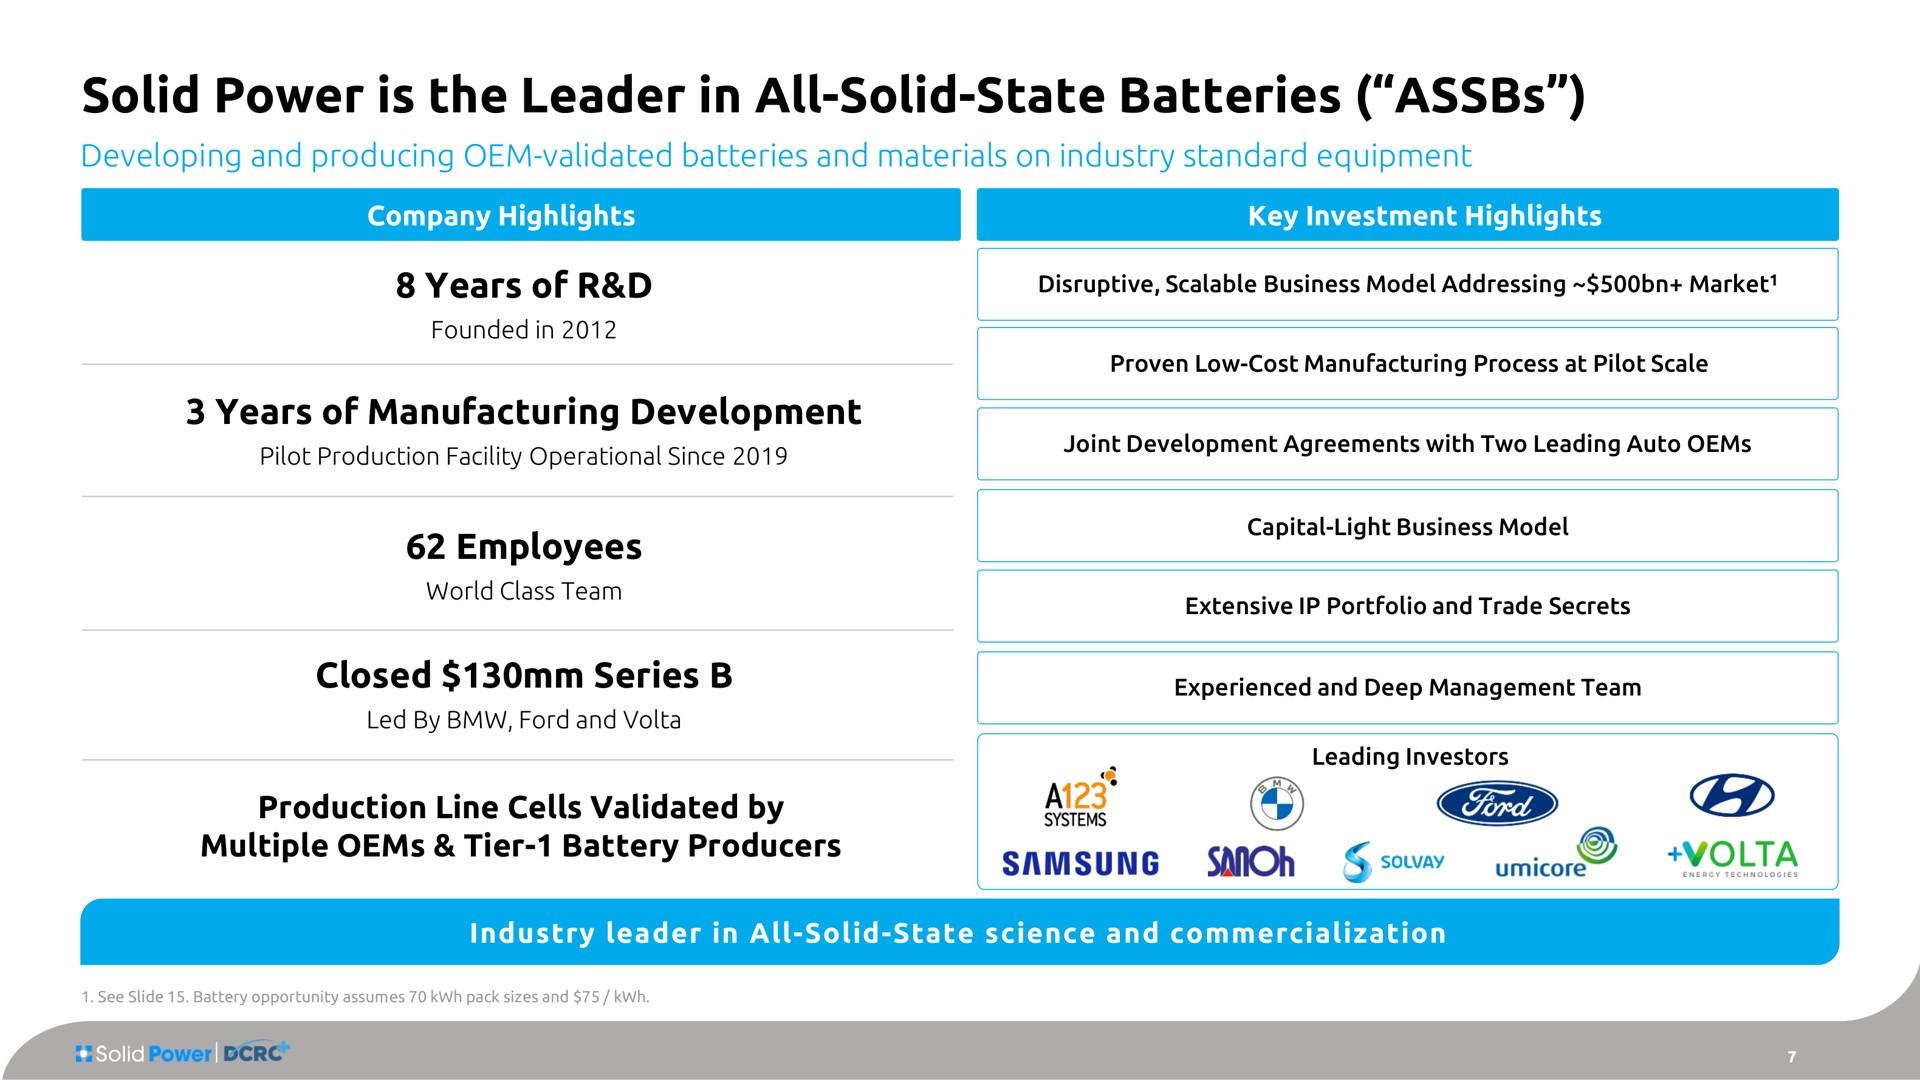 solid power is the leader in all solid state batteries developing and producing validated batteries and materials on industry standard equipment years of years of manufacturing development employees closed series production line cells validated by multiple tier battery producers | Solid Power